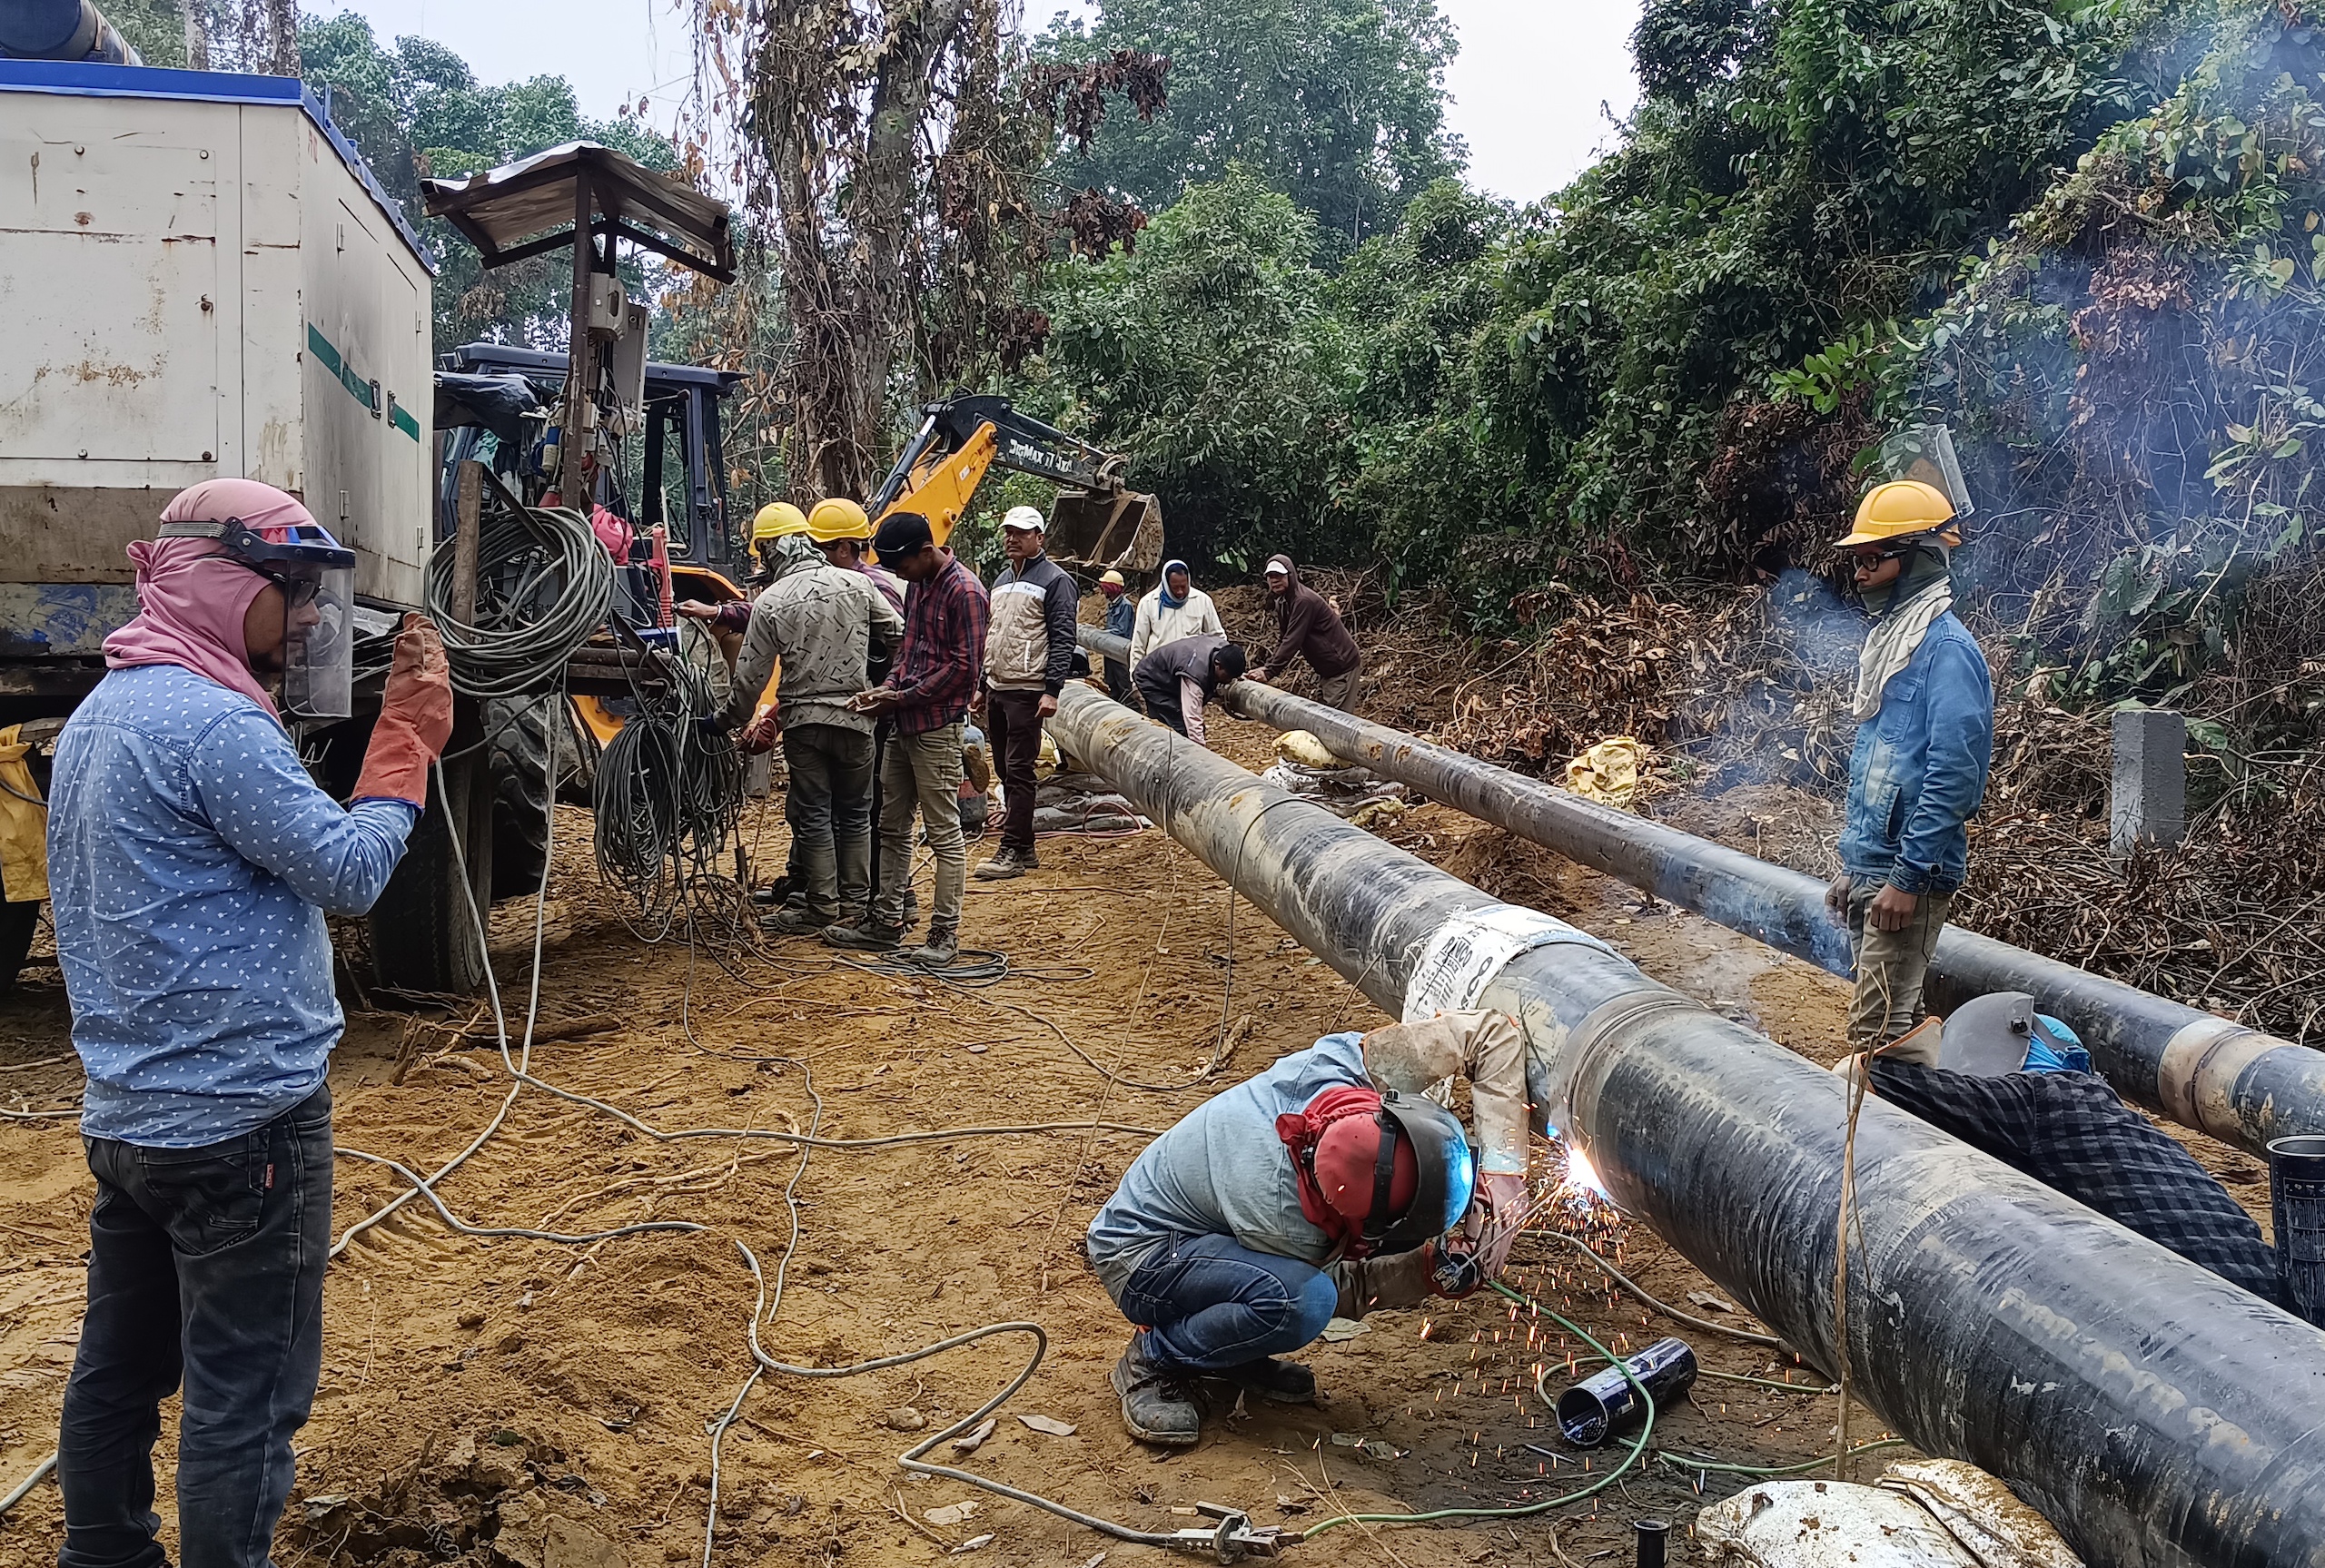 <p>Two new pipelines being laid in late December 2022. The pipelines will connect an oil and gas field in Arunachal Pradesh to a central gas gathering station in Assam, passing through nearly 20 kilometres of protected forest. (Image: Gurvinder Singh)</p>